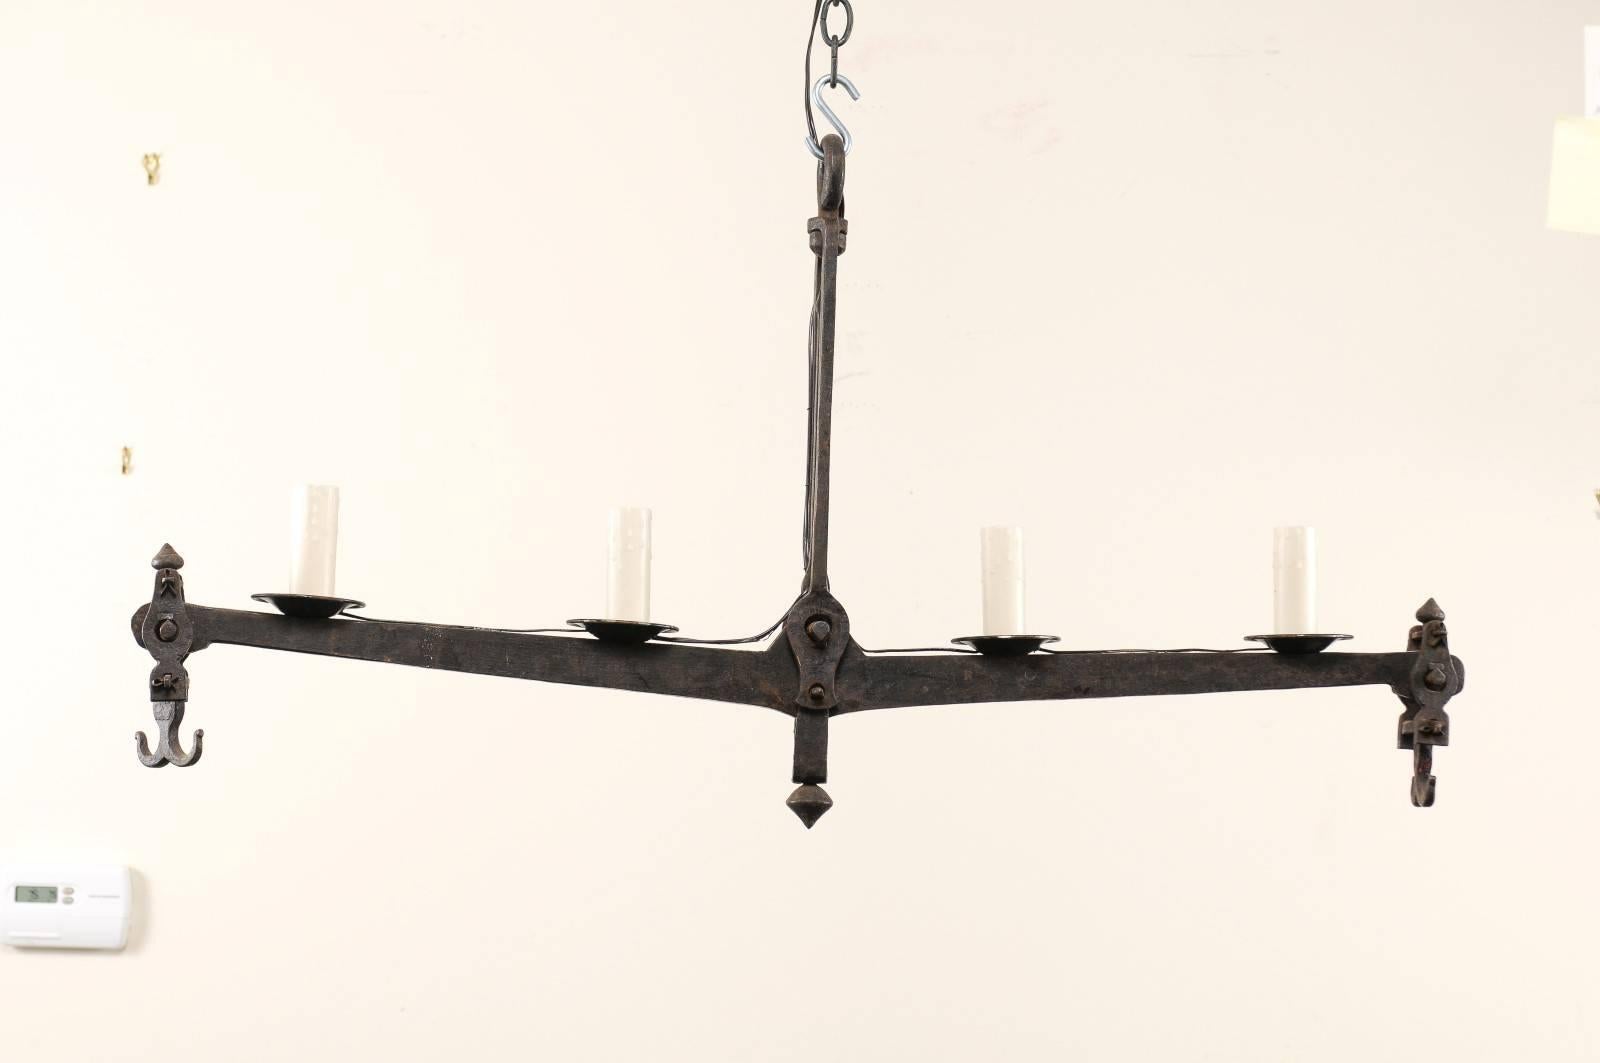 A midcentury French iron scale chandelier. This French chandelier features a central beam from a mid-20th century wrought iron scale. This four-light chandelier has a simplistic and appealing design aesthetic. There is lovely, aged patina